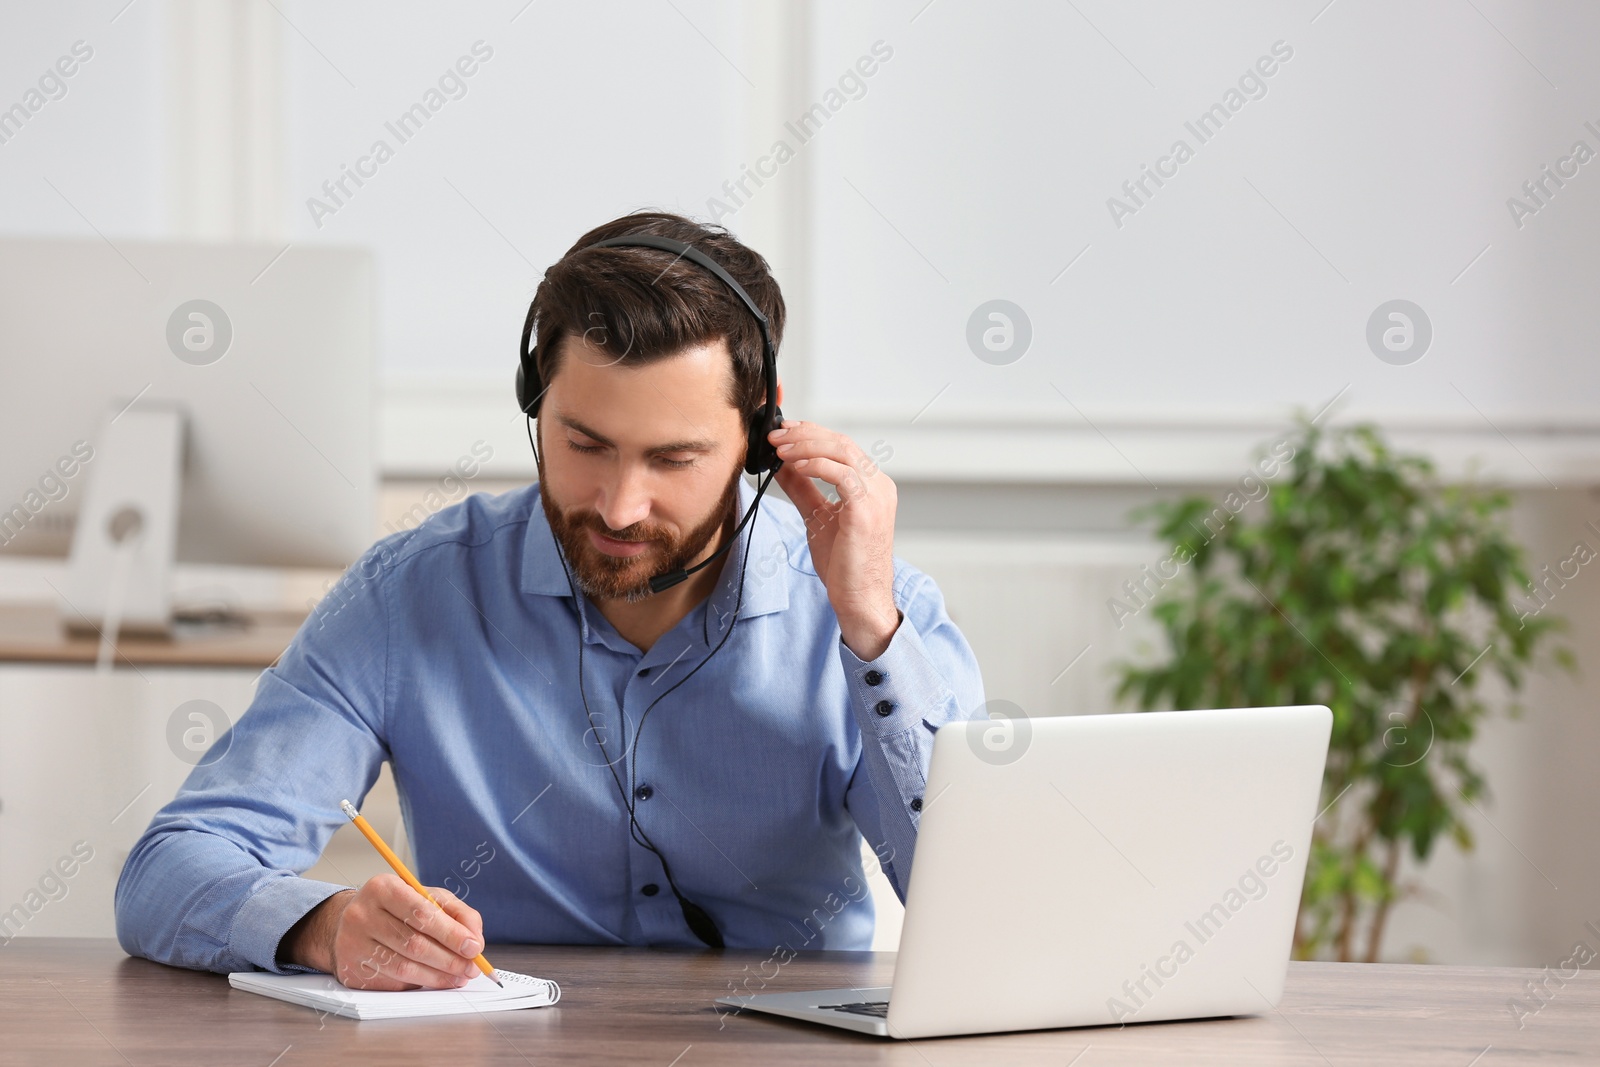 Photo of Hotline operator with headset writing something in notebook while working at wooden table